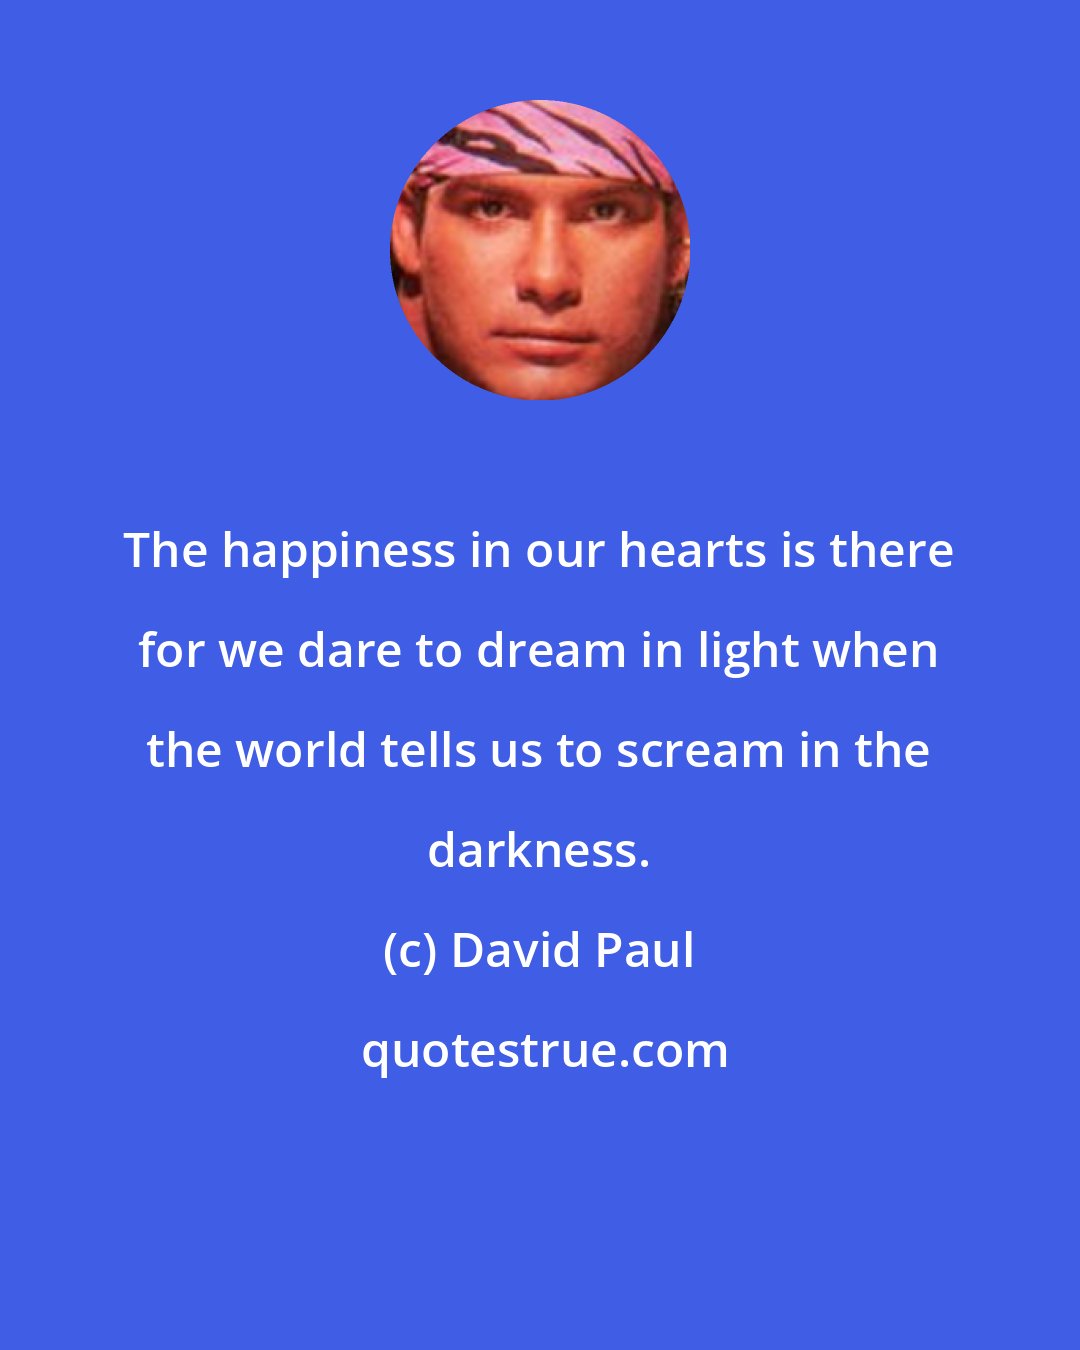 David Paul: The happiness in our hearts is there for we dare to dream in light when the world tells us to scream in the darkness.